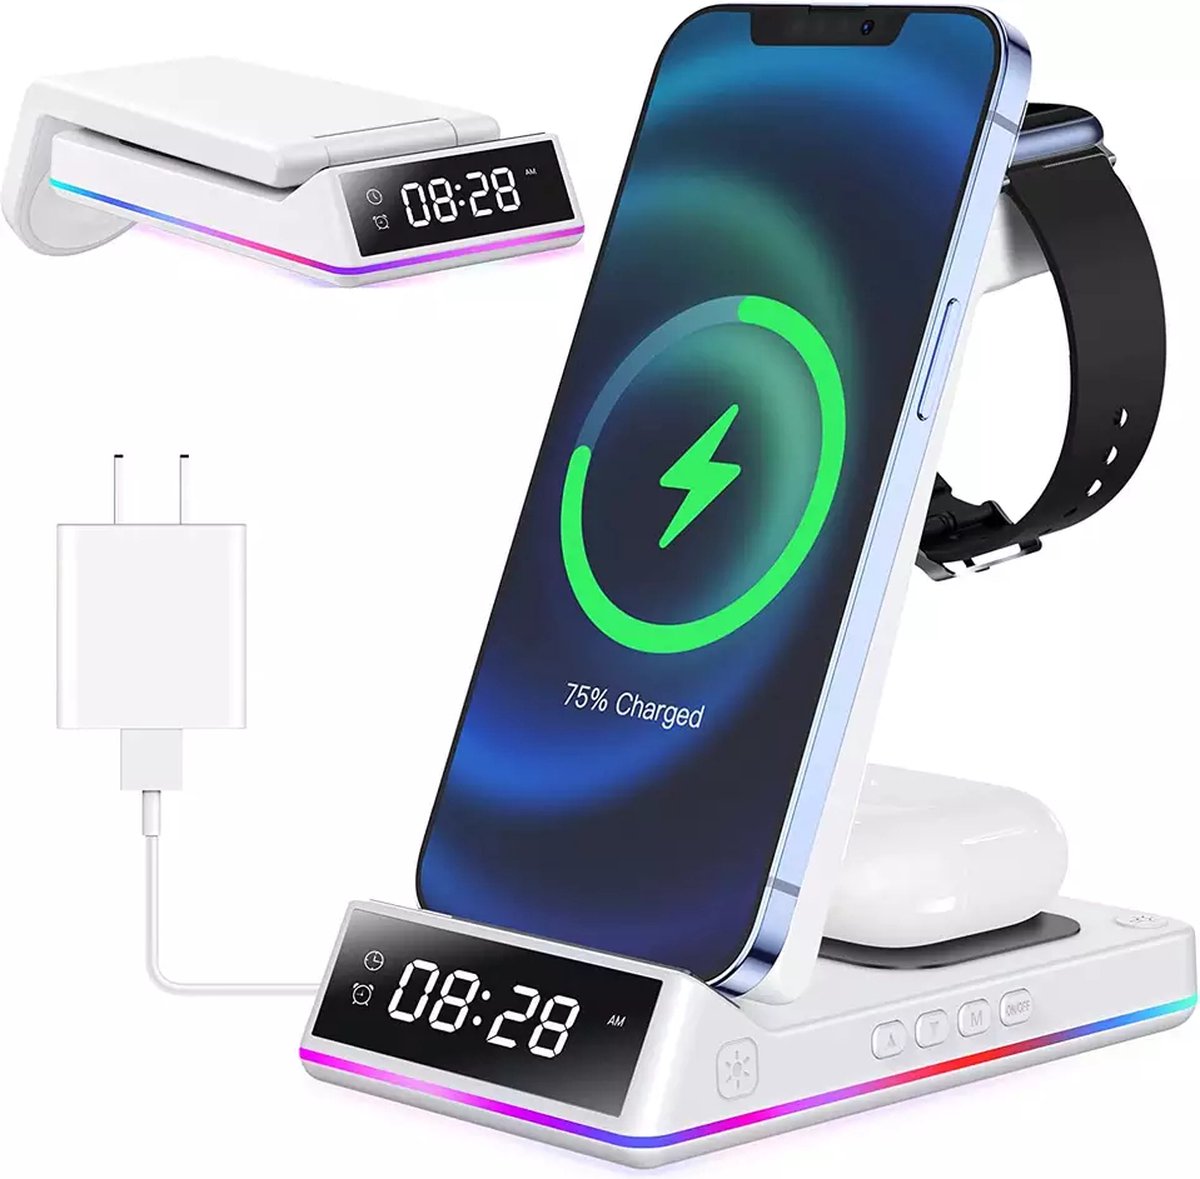 3 in 1 Draadloos Laadstation 15W- wireless charger- wit - Voor iPhone 13 12 11 Pro Max Apple Horloge AirPods - LED Digitale Wekker Draadloze Oplader Stand